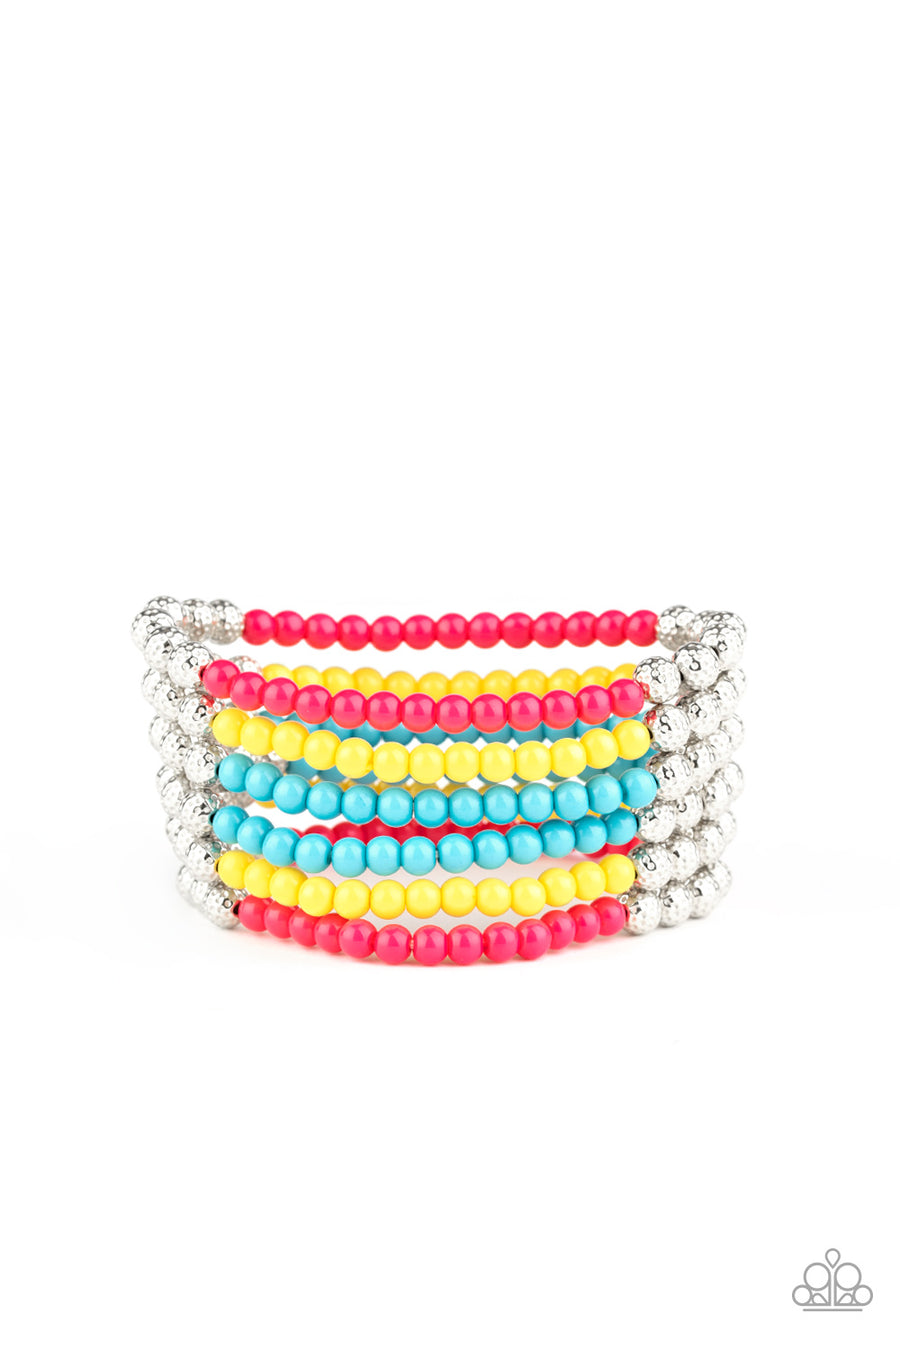 Layer It On - Multi Colored Beaded Bracelet  - Paparazzi Accessories